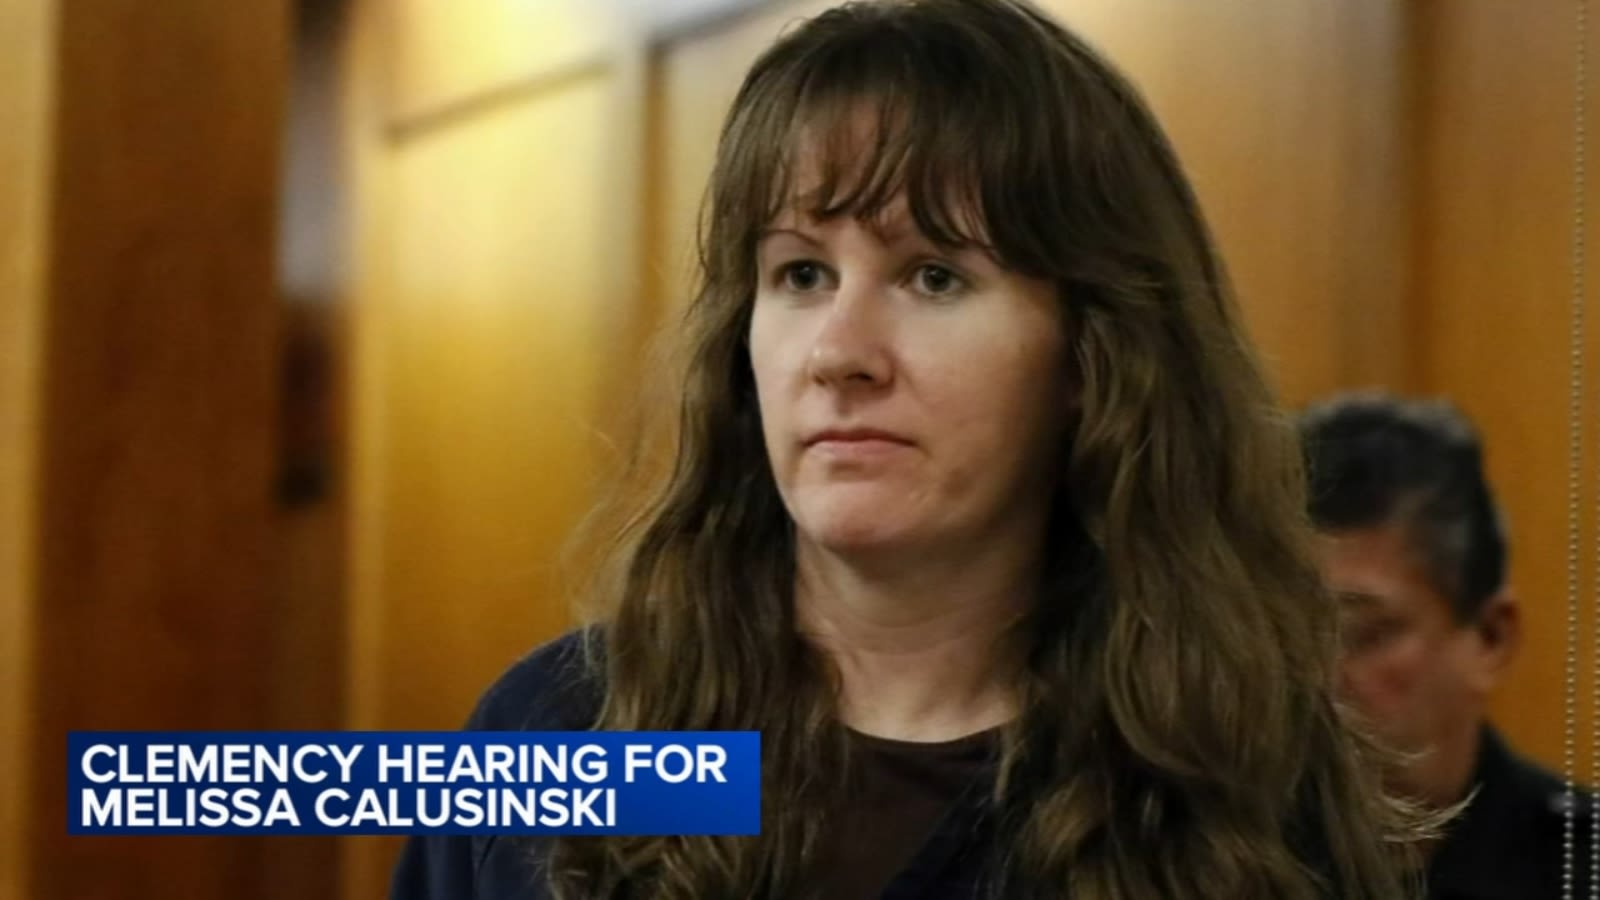 Melissa Calusinski, daycare worker convicted of toddler's murder, pleads case at clemency hearing